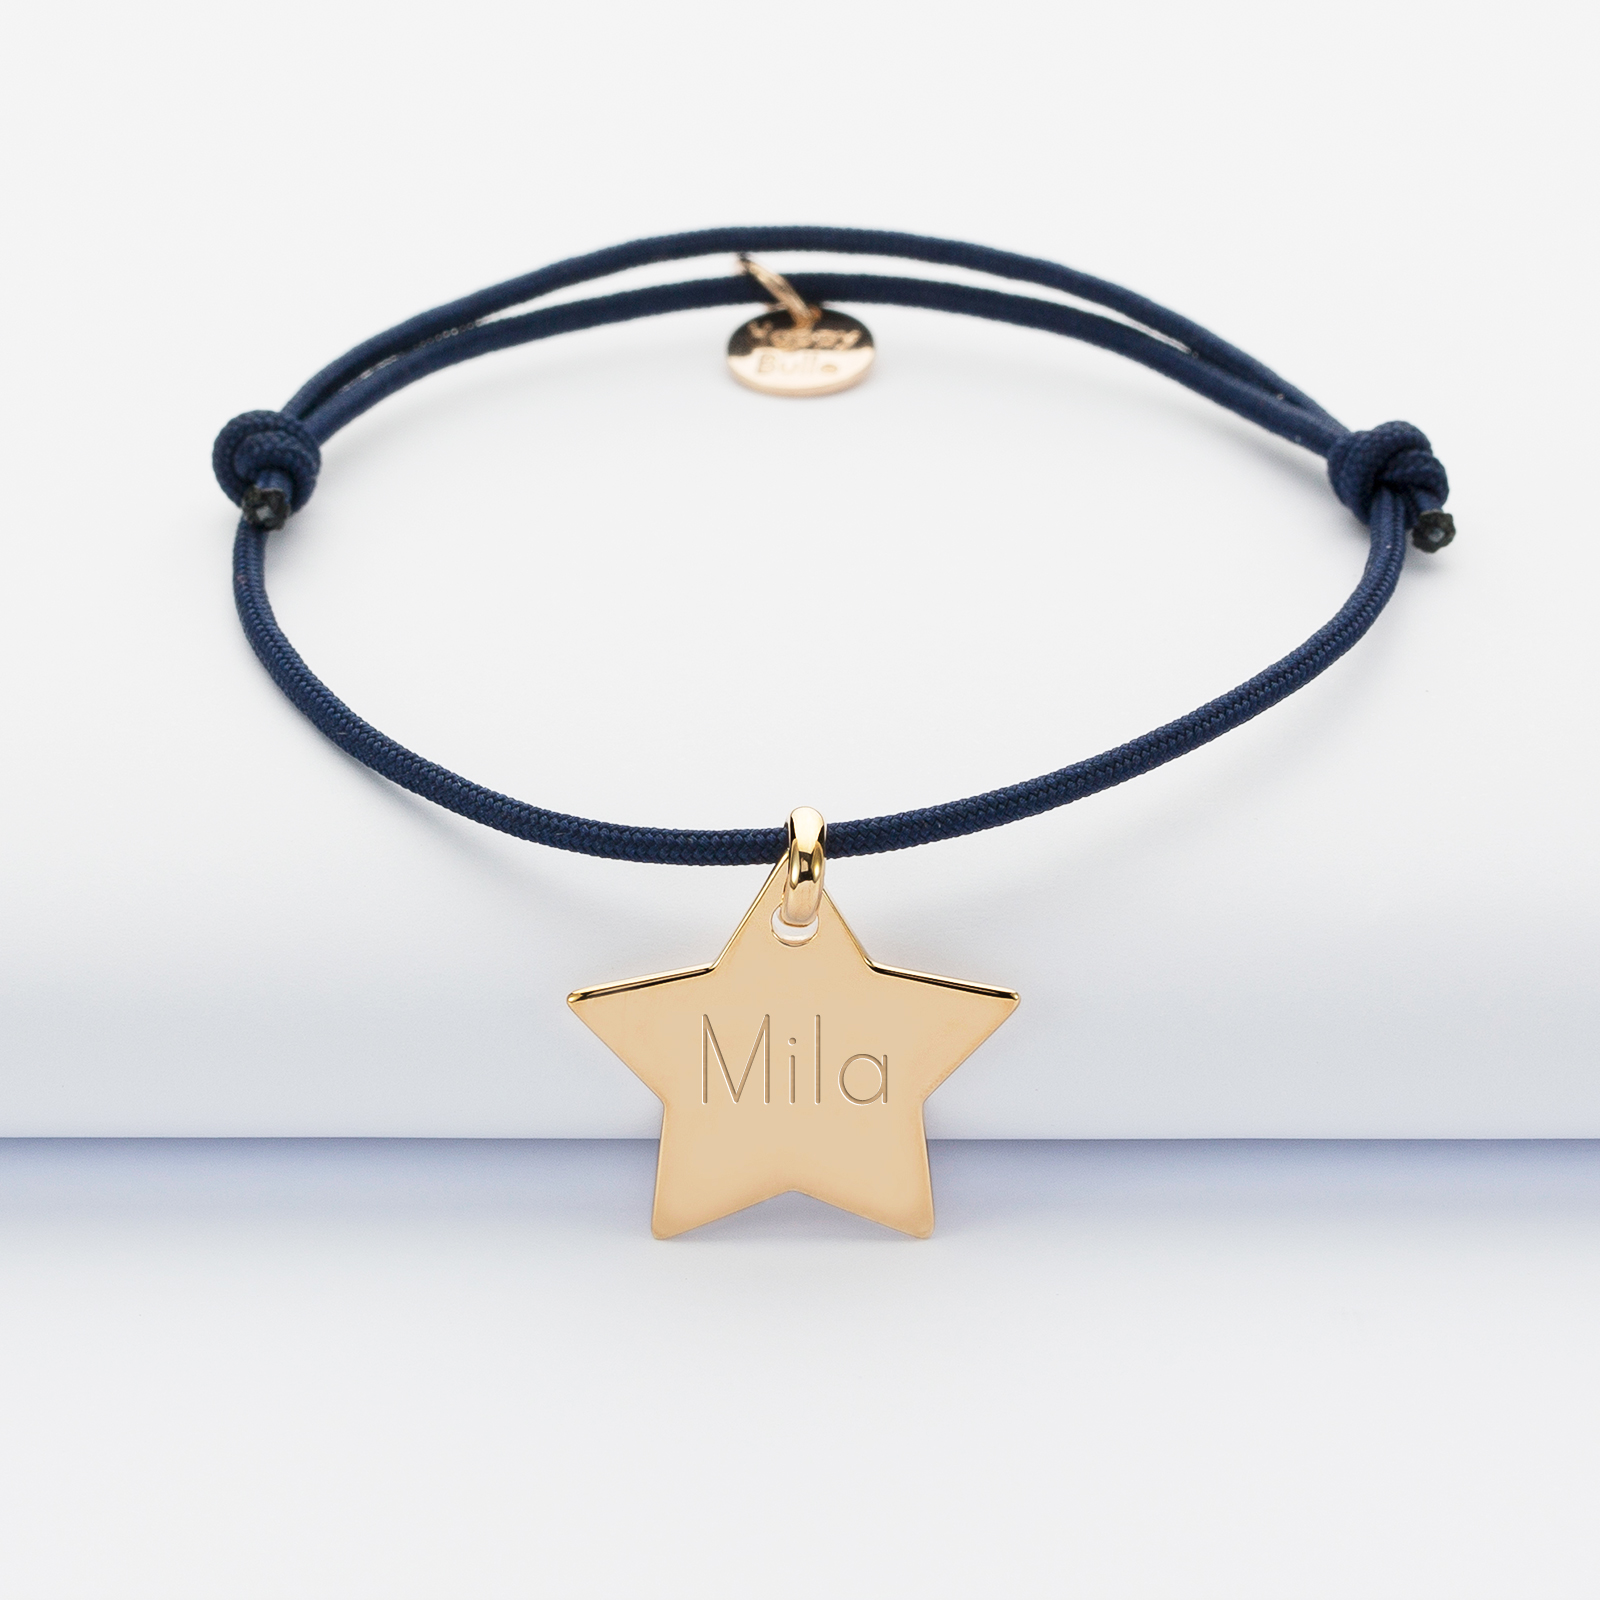 Personalised engraved gold plated star name medallion 20x20mm bracelet name